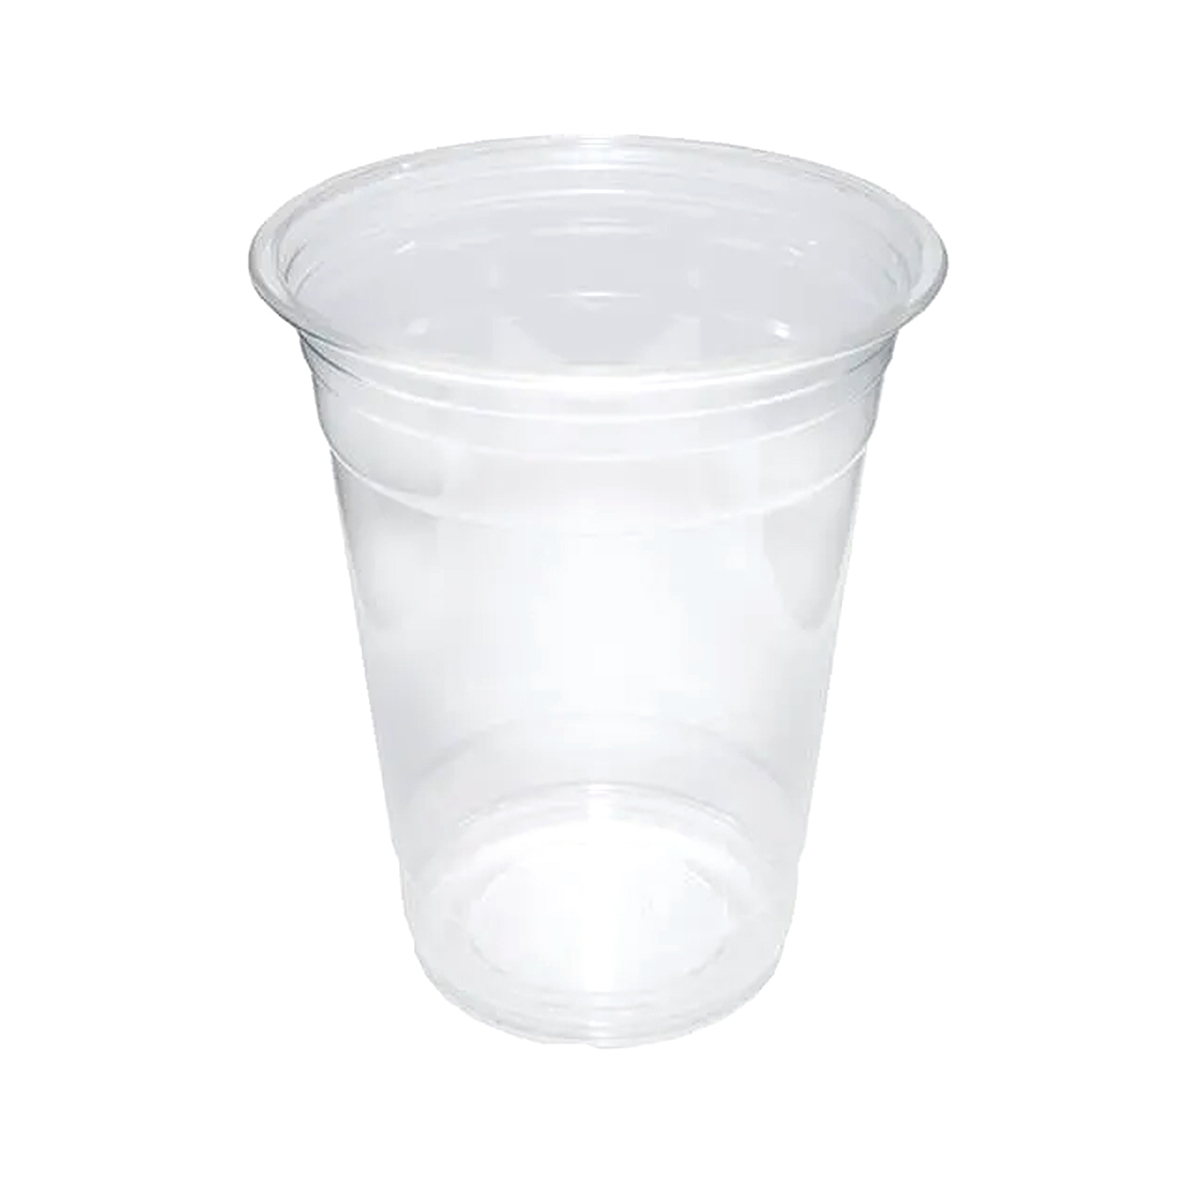 Cup 12oz Clear rPet (R16003)